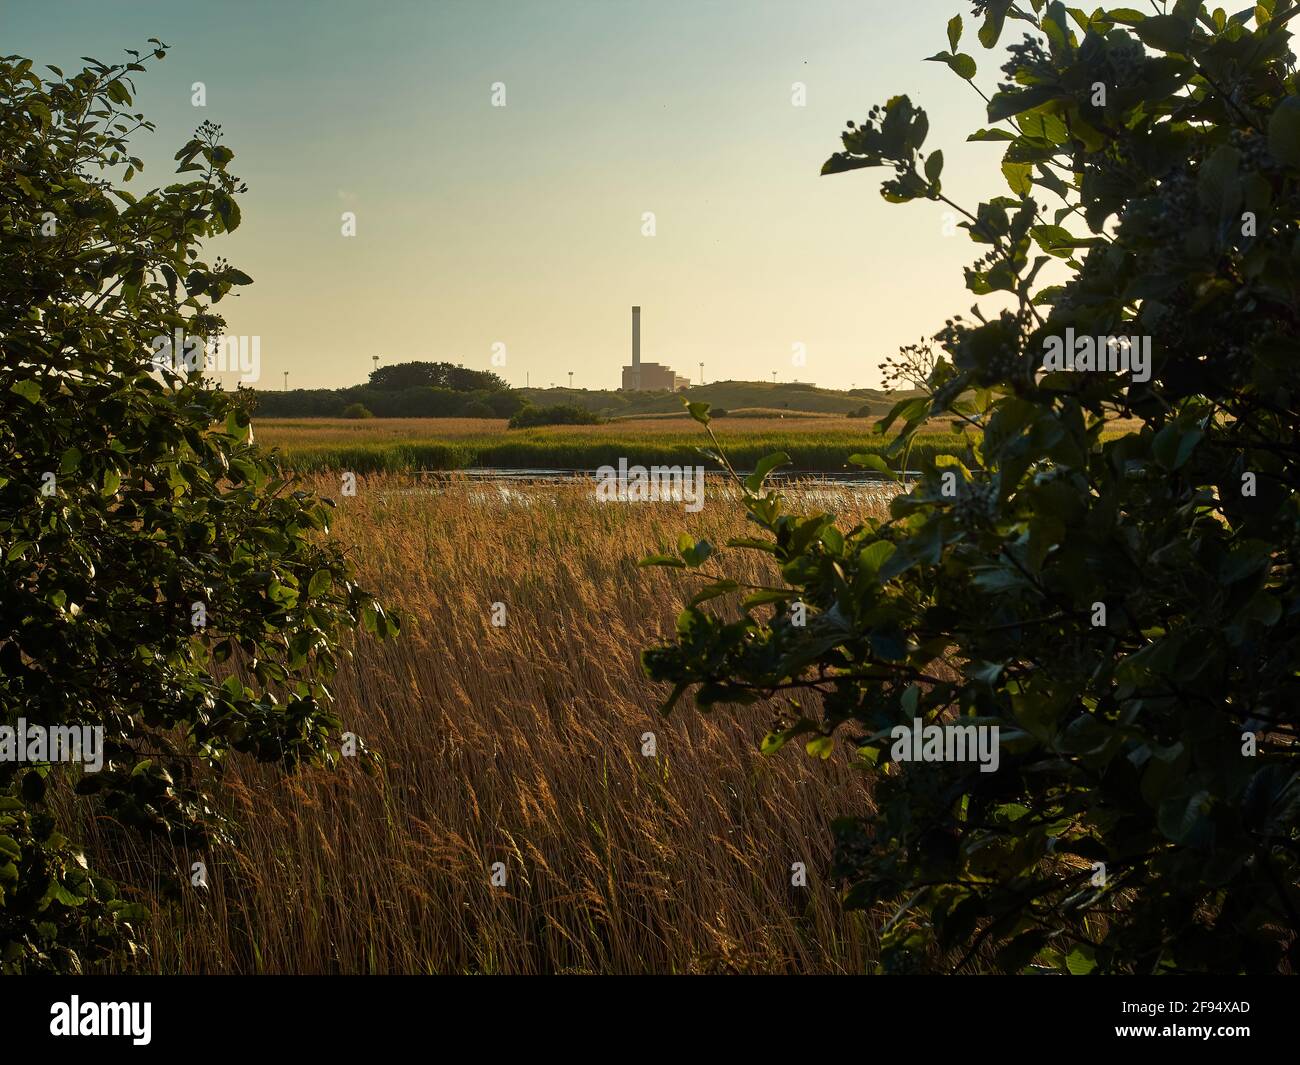 Bright, golden image of marshland reeds, rushes and plants and a horizon where the abandoned Redcar Steelworks stands in silhouette. Stock Photo